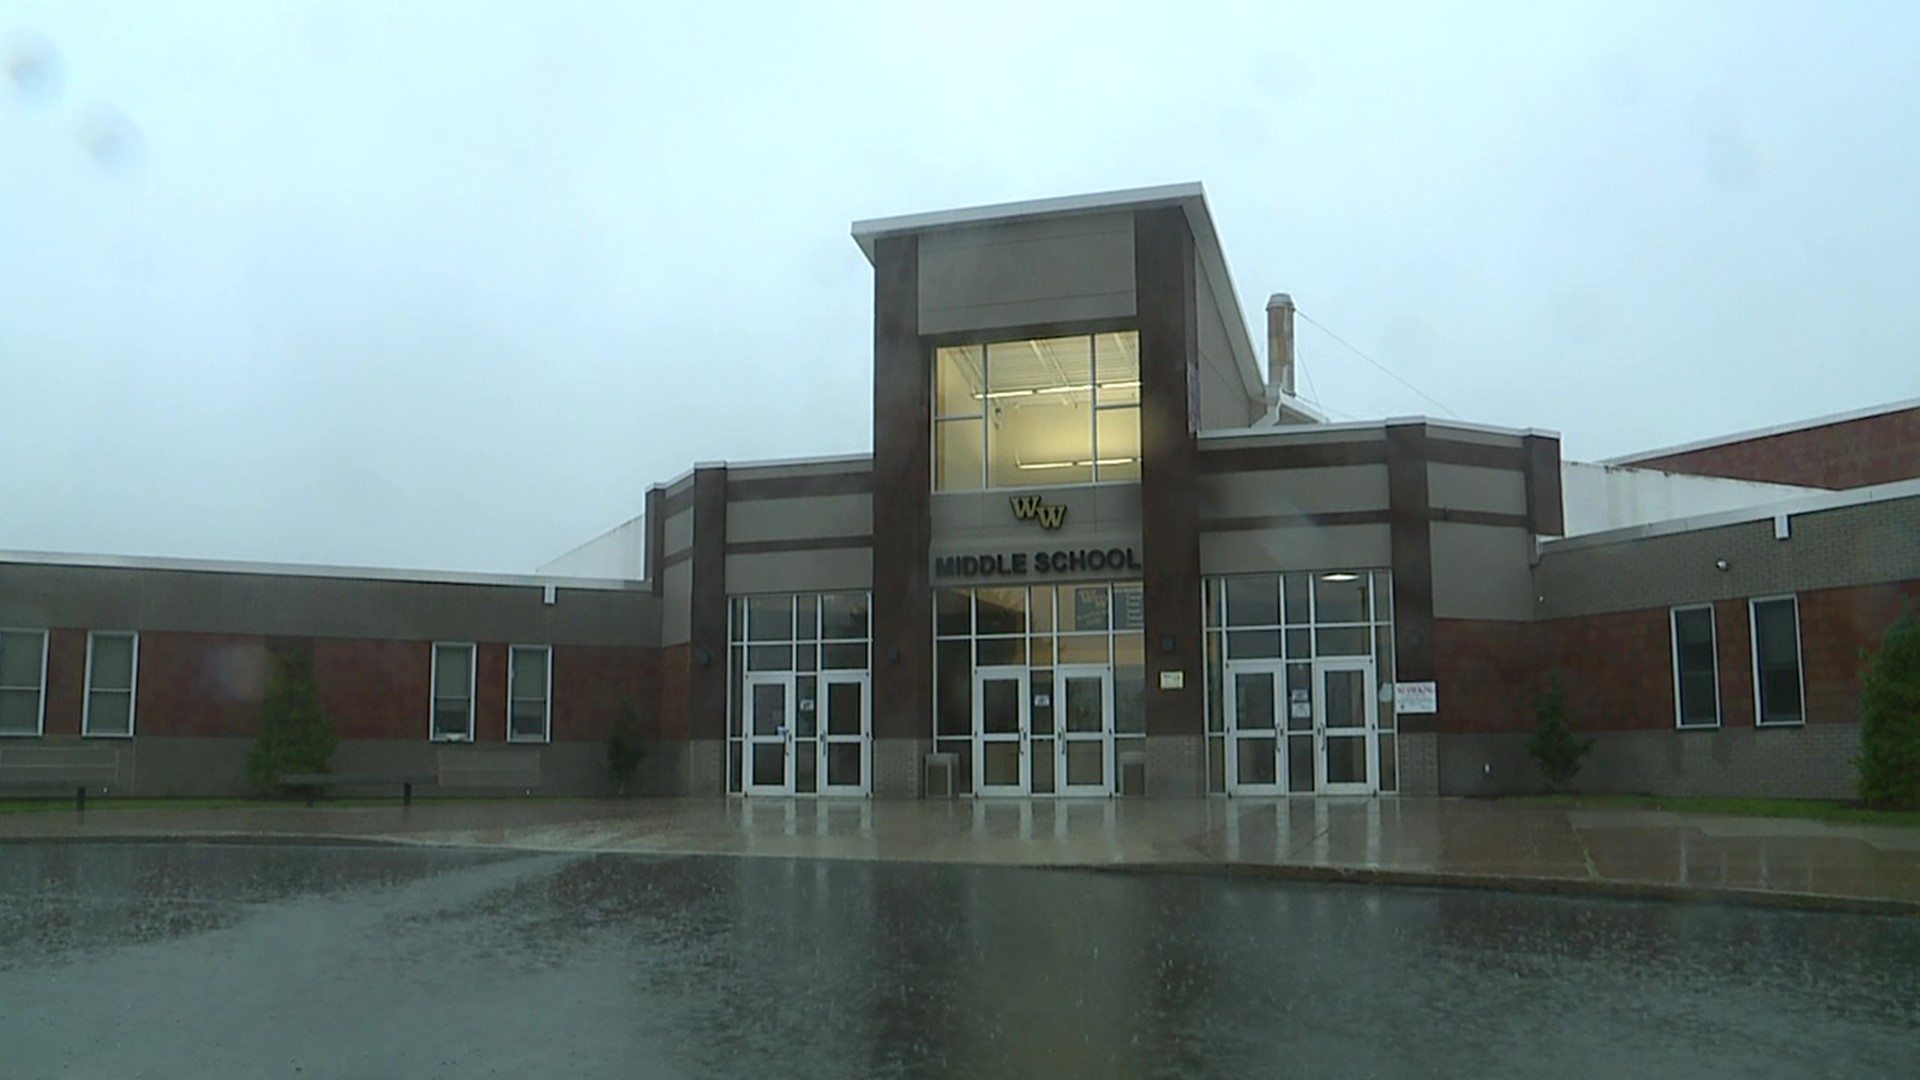 Police say the bullet hole was discovered Wednesday, just above a door at the main entrance at Western Wayne Middle School.